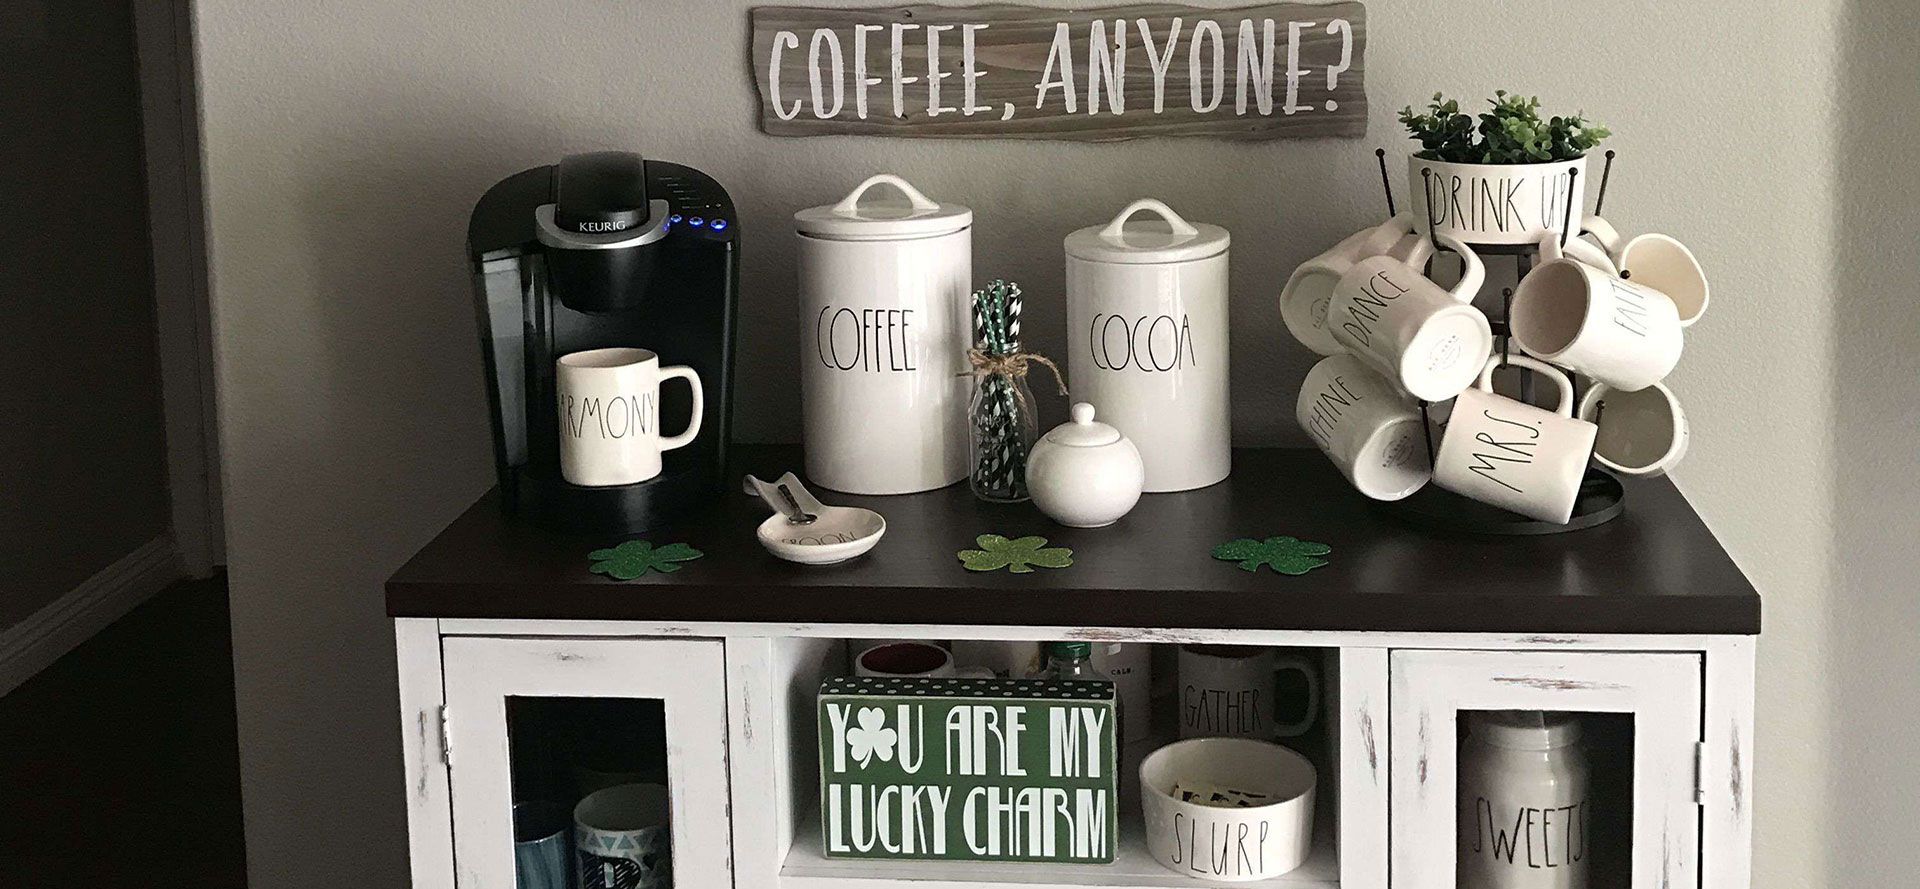 Decorating Coffee Station With Charming Framed Message.